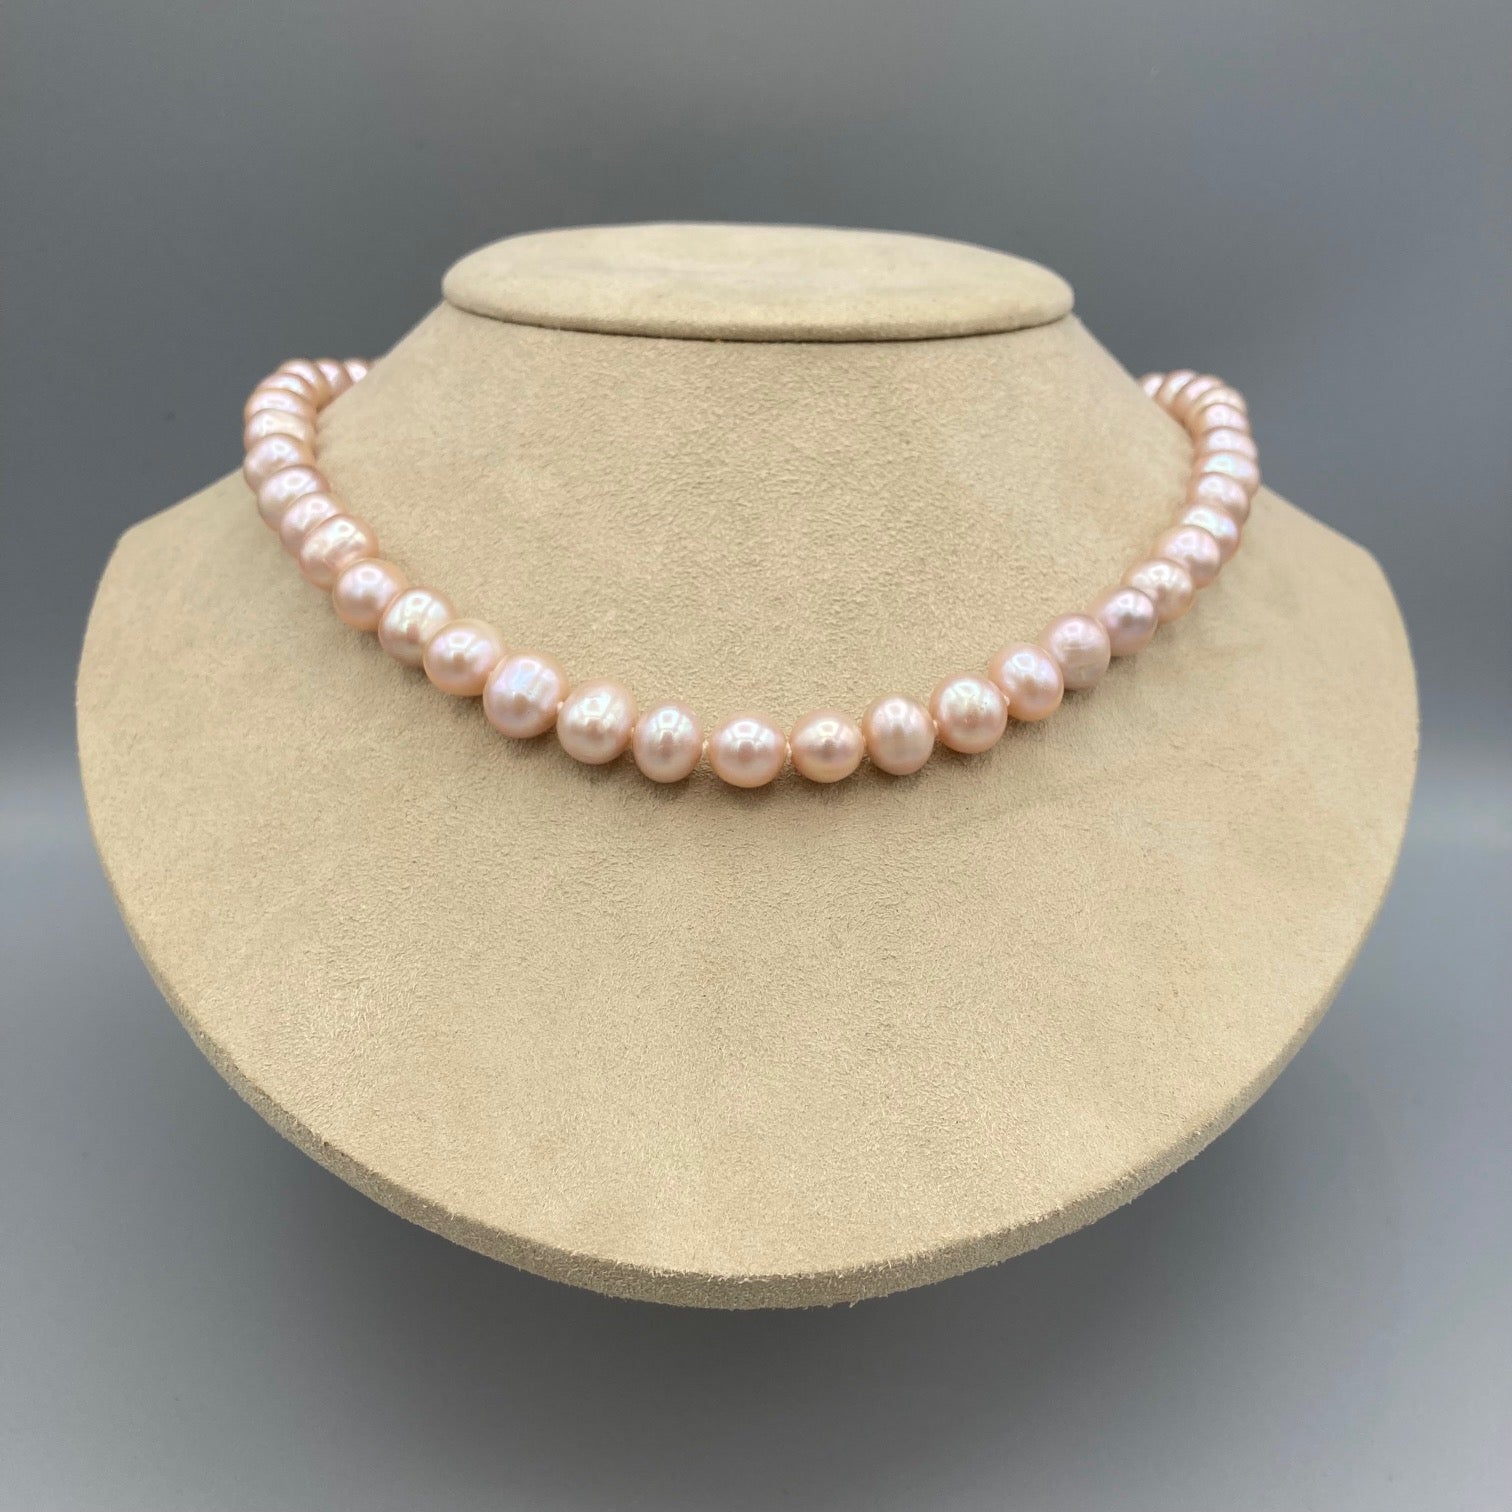 Beautiful Pink Tone Fresh Water Pearl Necklace with 14k White Gold Clasp